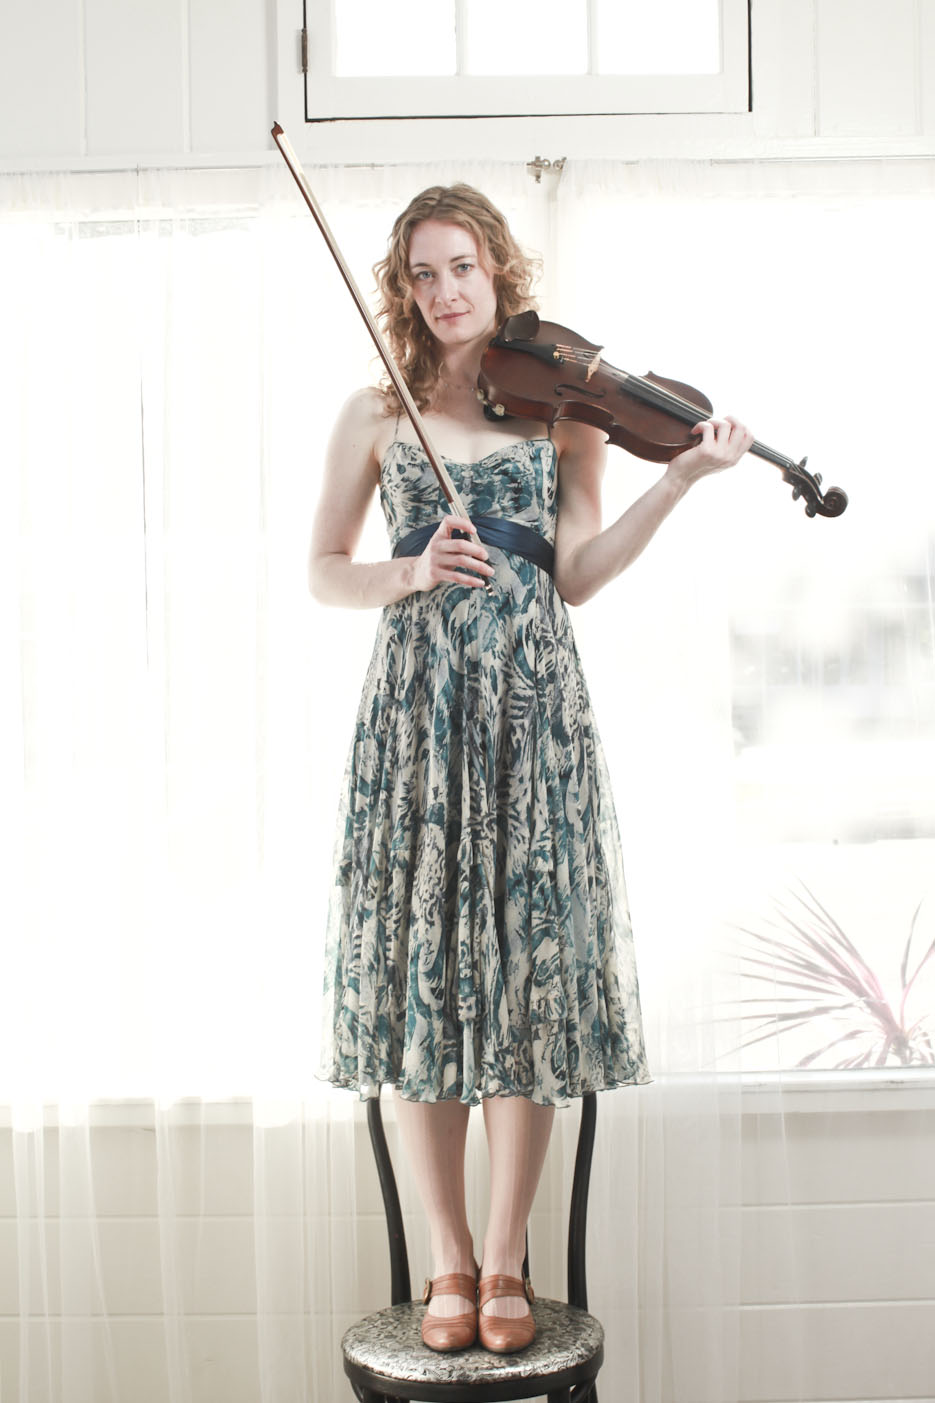 Laurel Thomsen standing on a chair with her violin